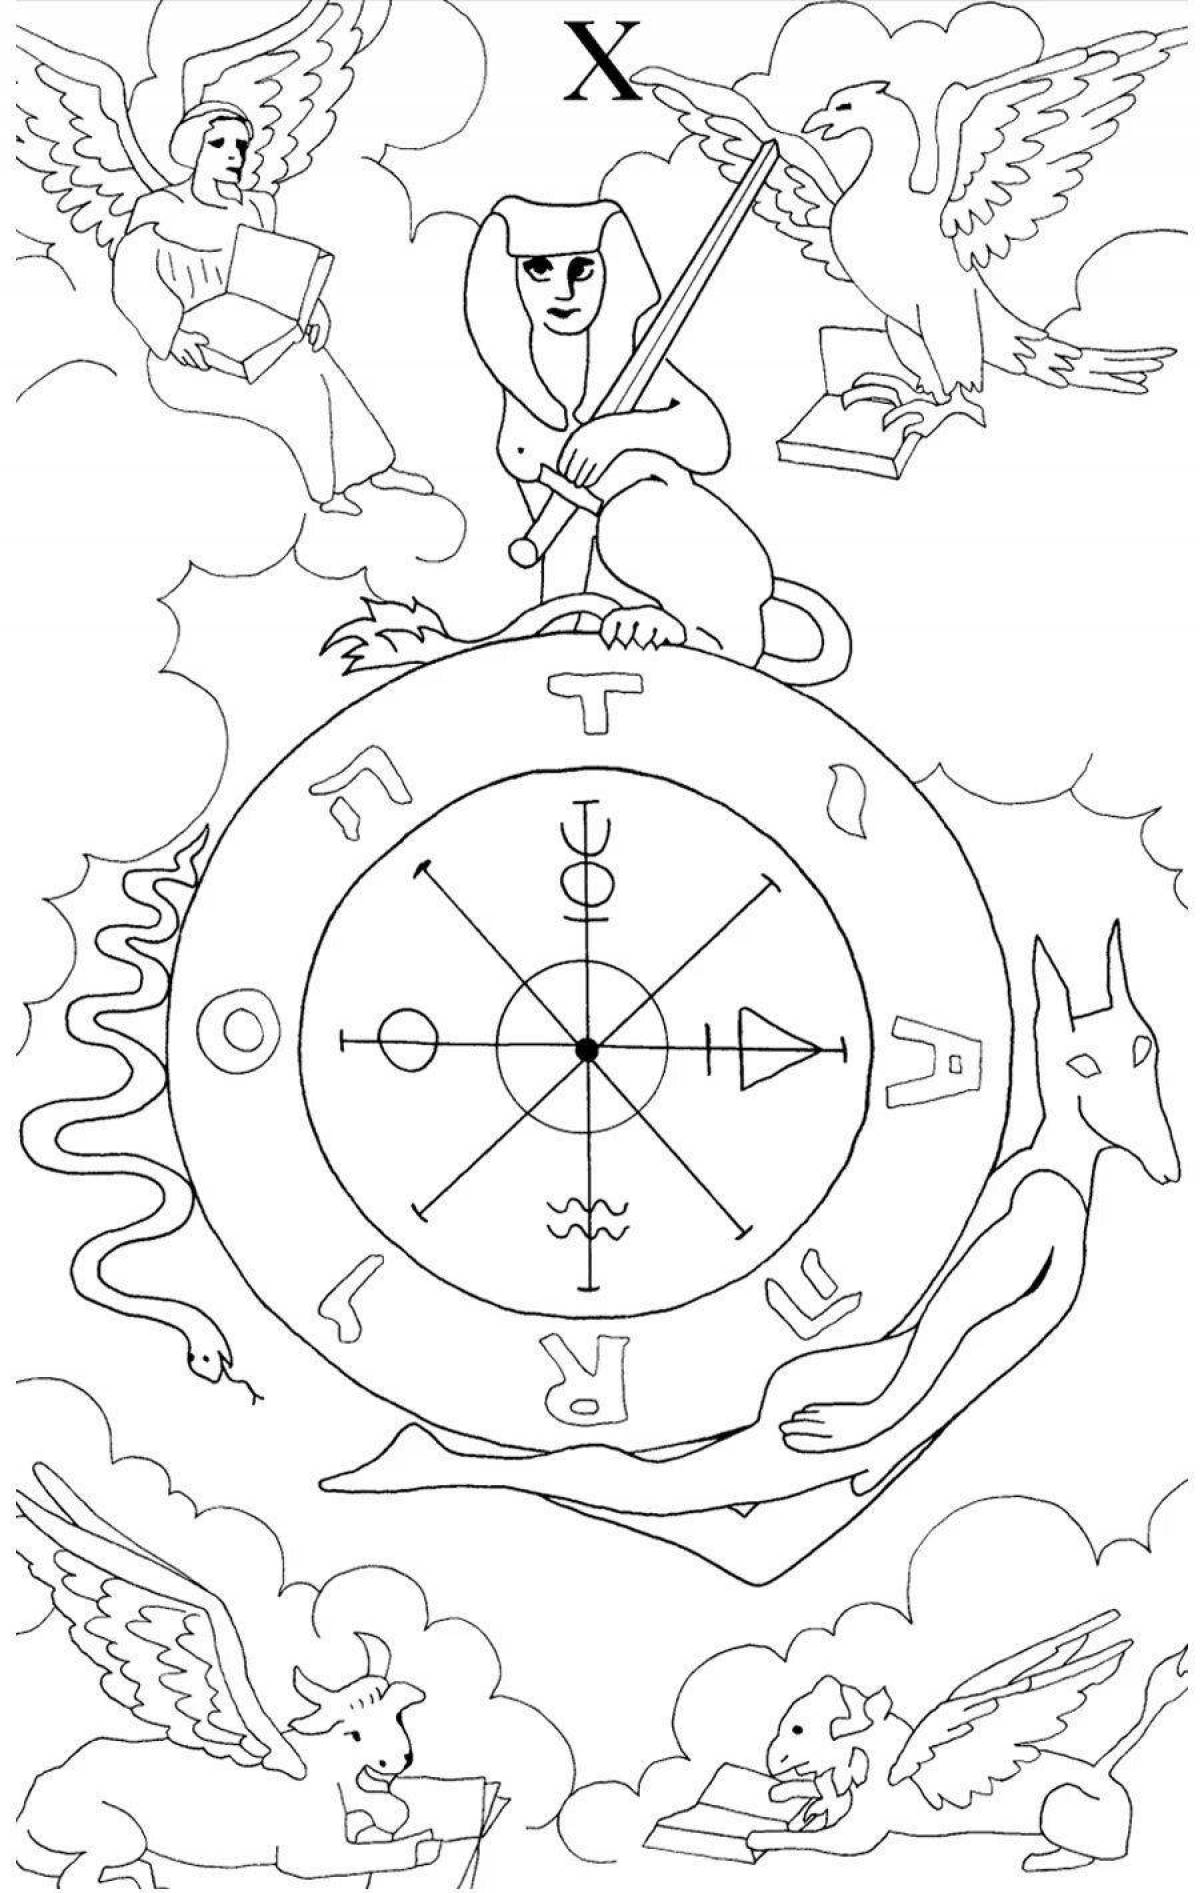 Amazing tarot card coloring pages